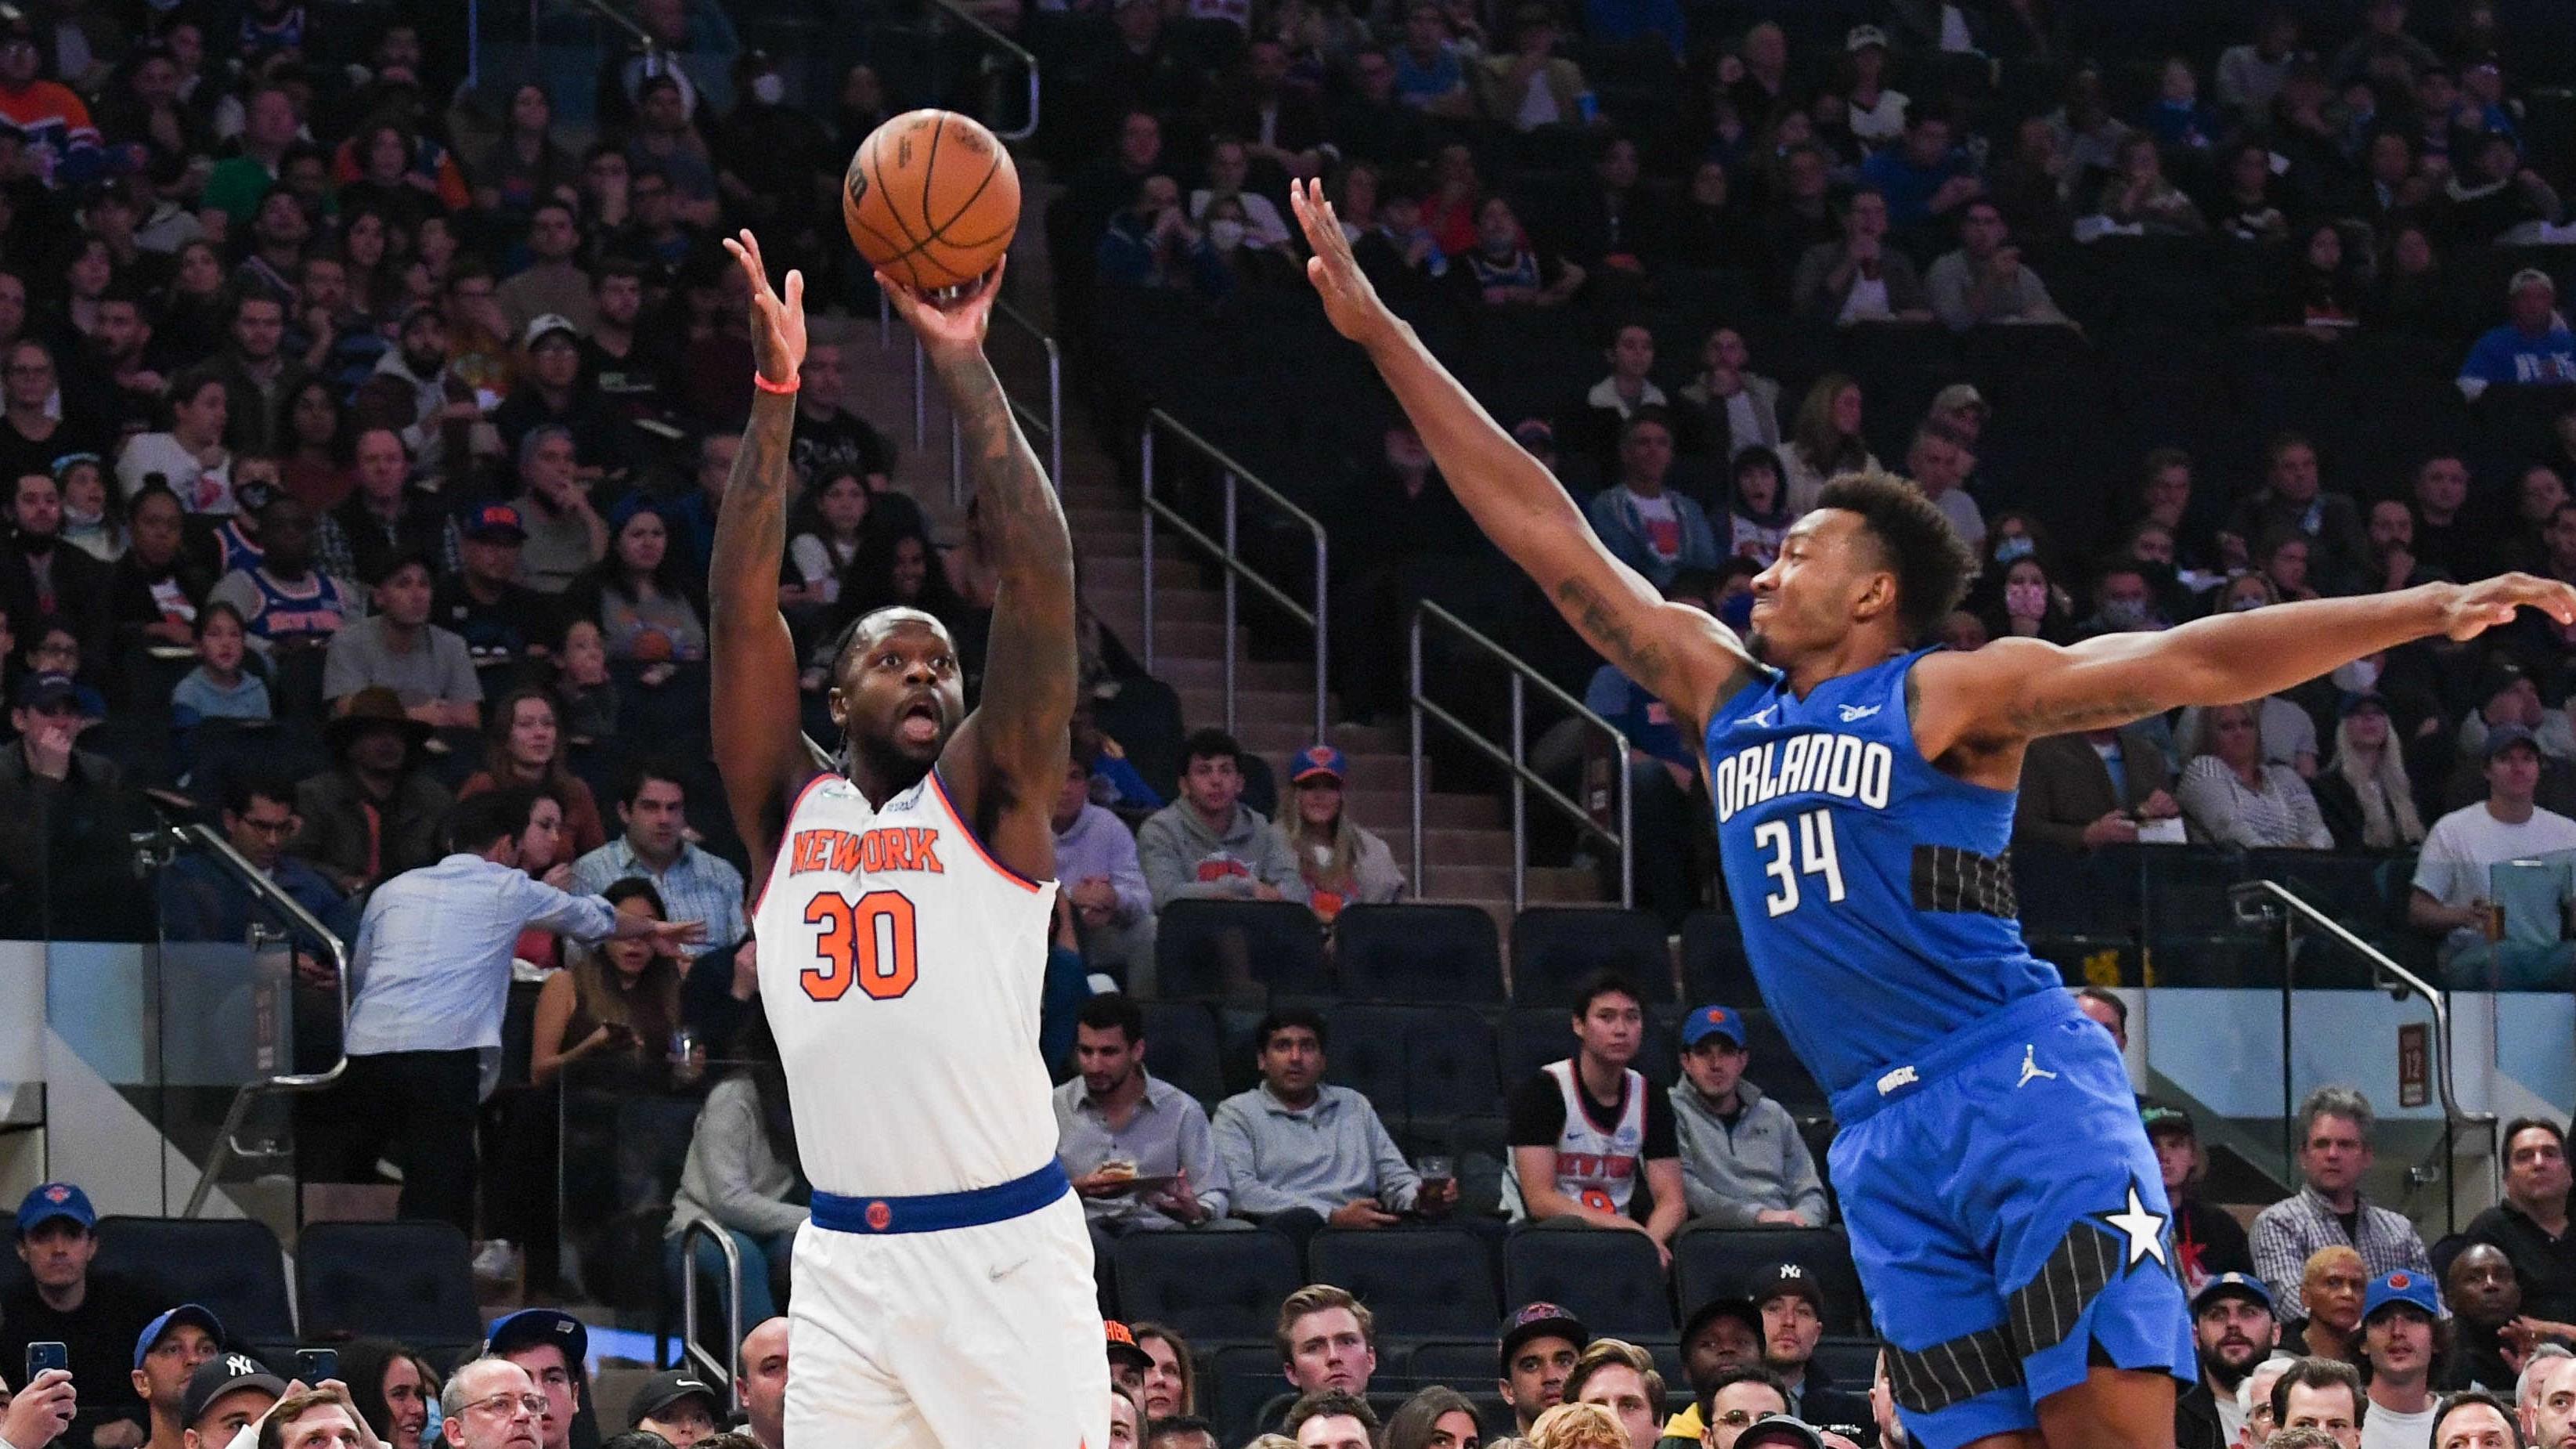 Oct 24, 2021; New York, New York, USA; New York Knicks forward Julius Randle (30)attempts a three pointer defended by Orlando Magic center Wendell Carter Jr. (34) during the first quarter at Madison Square Garden. Mandatory Credit: Dennis Schneidler-USA TODAY Sports / Dennis Schneidler-USA TODAY Sports